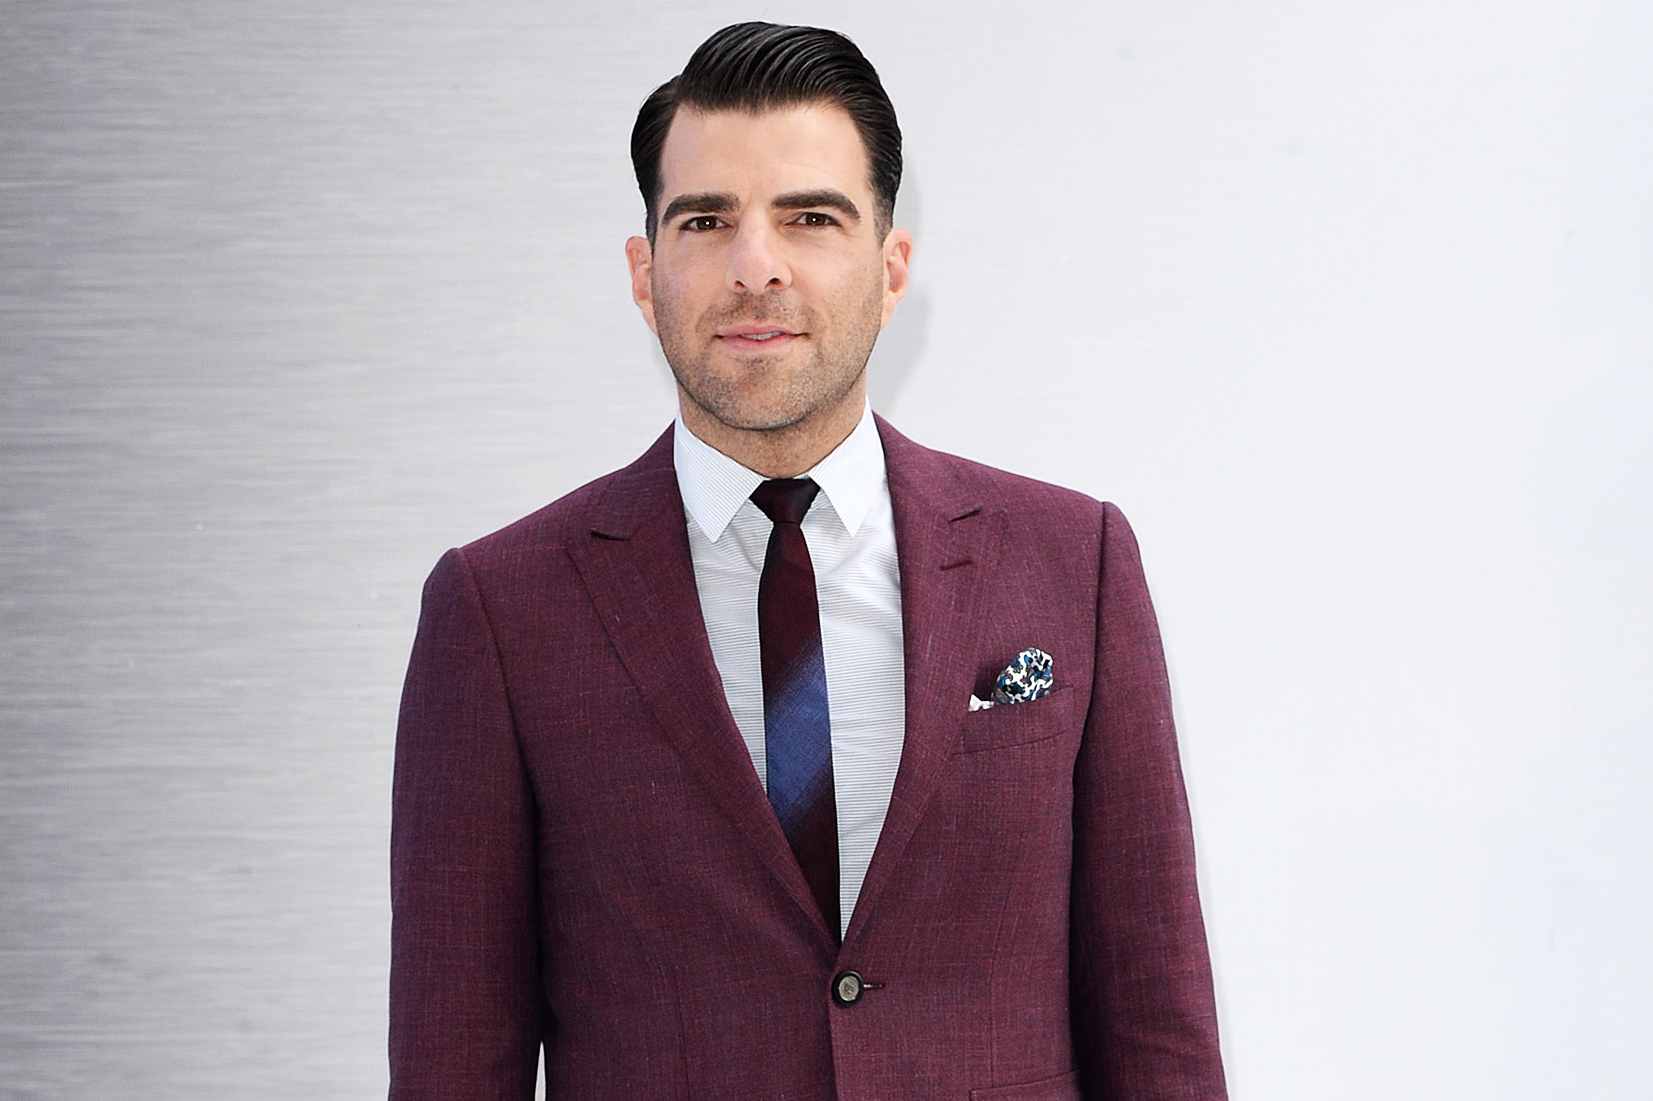 Zachary Quinto, on July 12, 2016 in London. (Anthony Harvey—Getty Images)